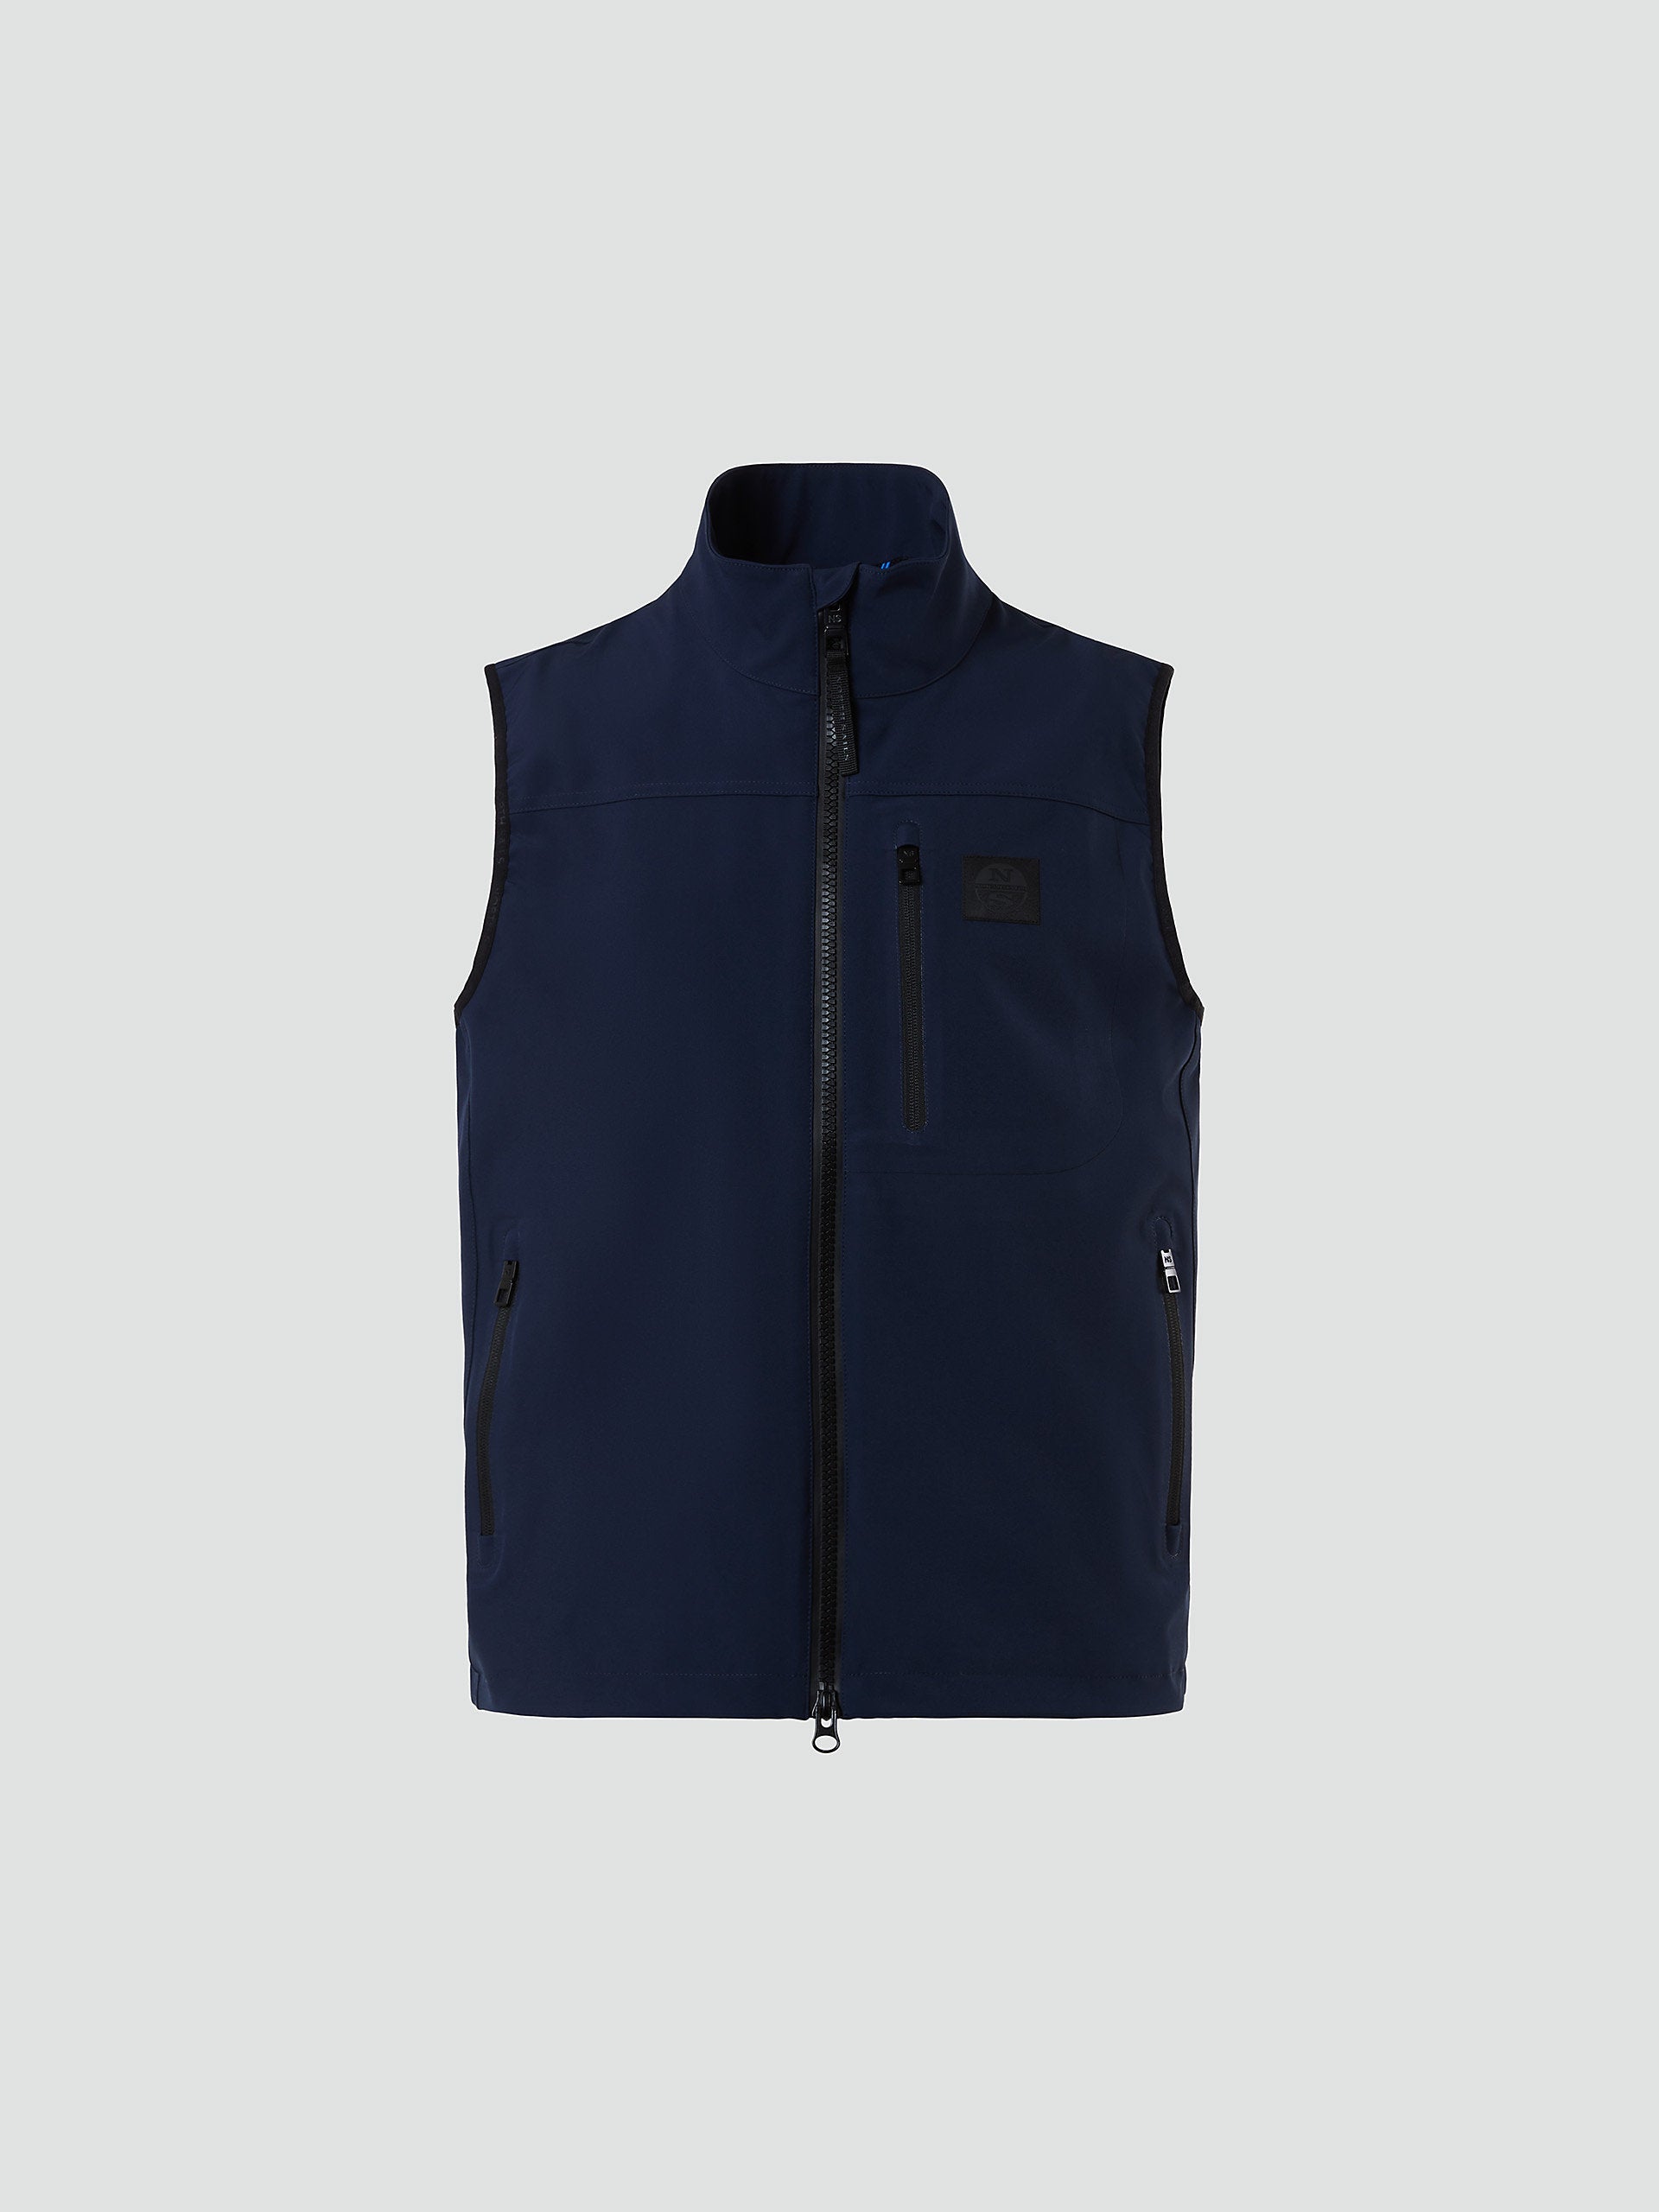 OFFSHORE STAND ZIP VEST M ナイロン BLU 0S24-20W-001 - その他